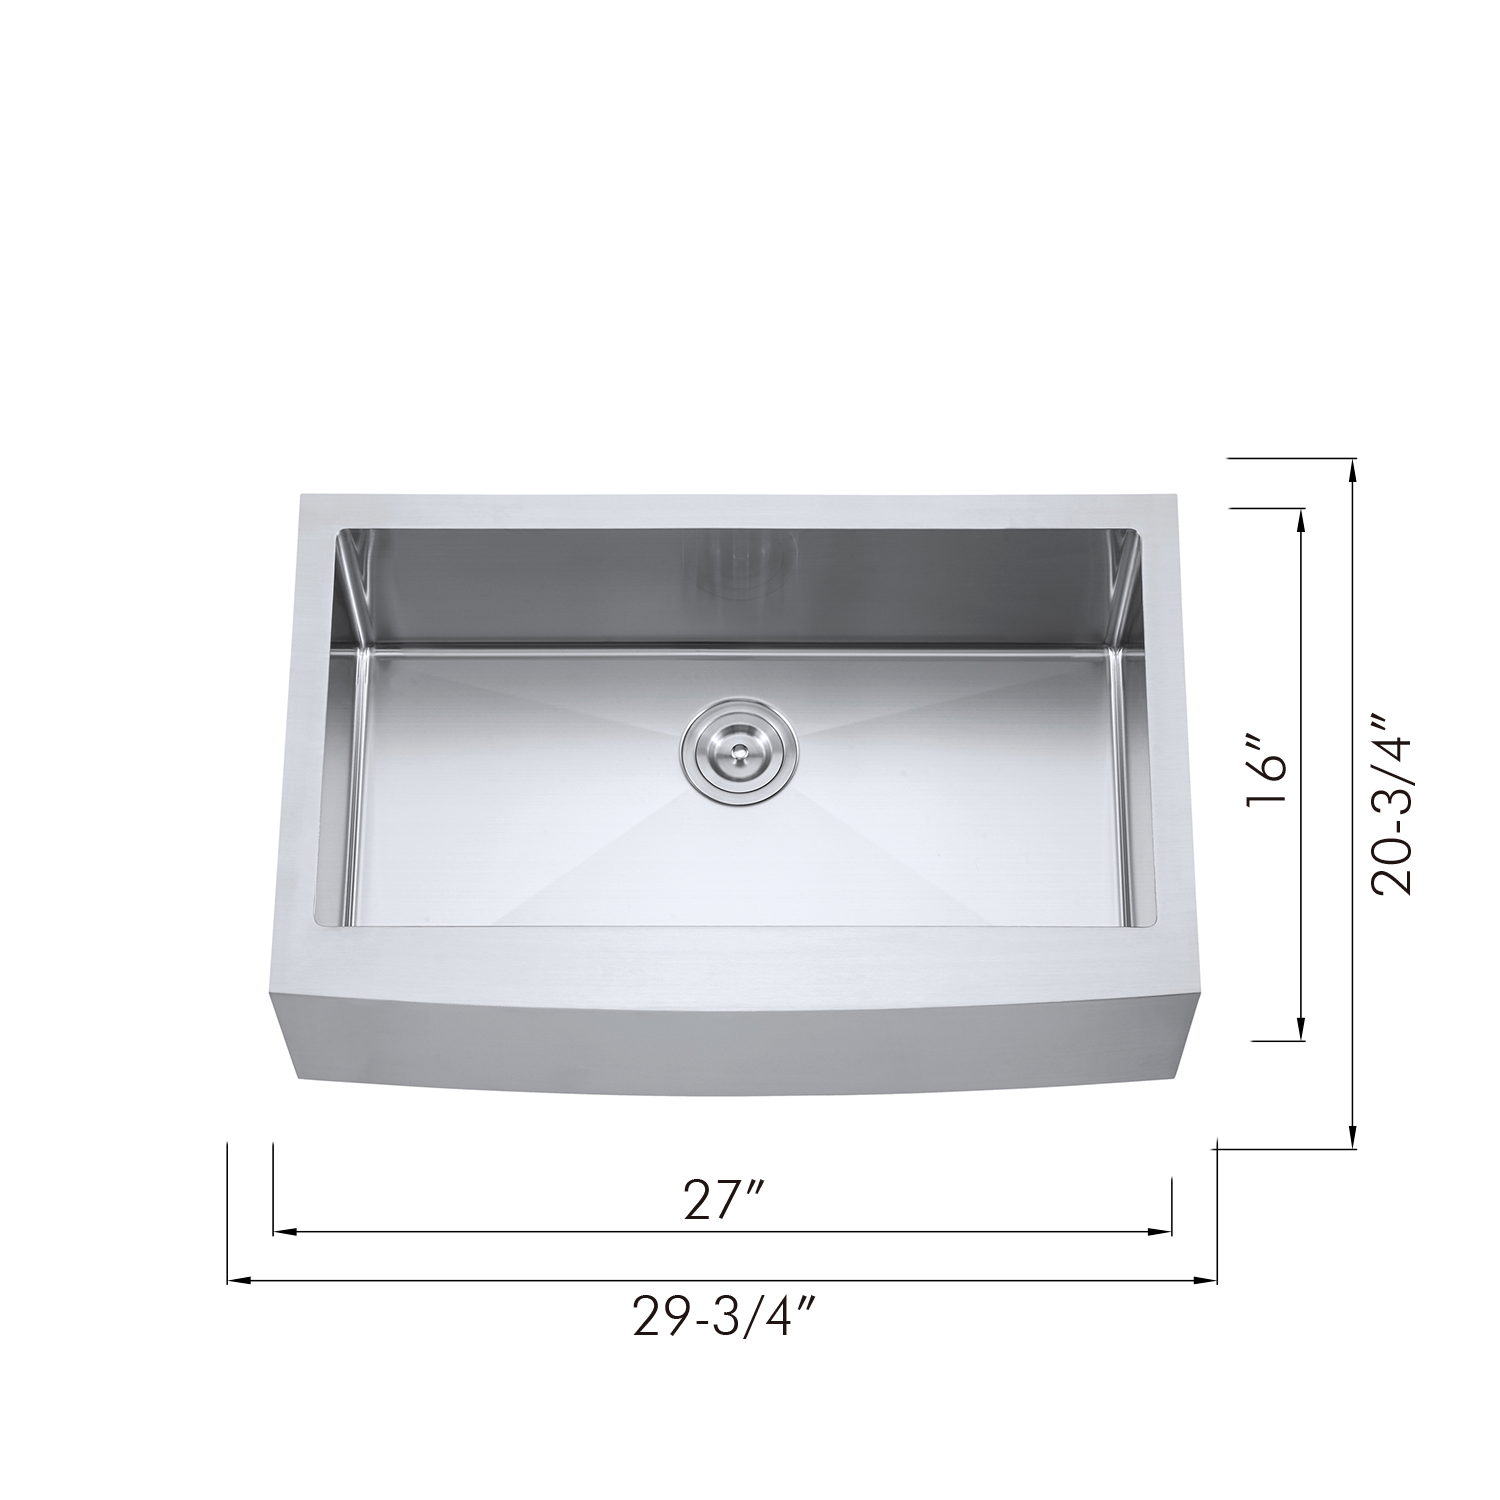 DAX Farmhouse Single Bowl Kitchen Sink, 18 Gauge Stainless Steel, Brushed Finish, 30 x 21 x 10 Inches (KA-3021R10)